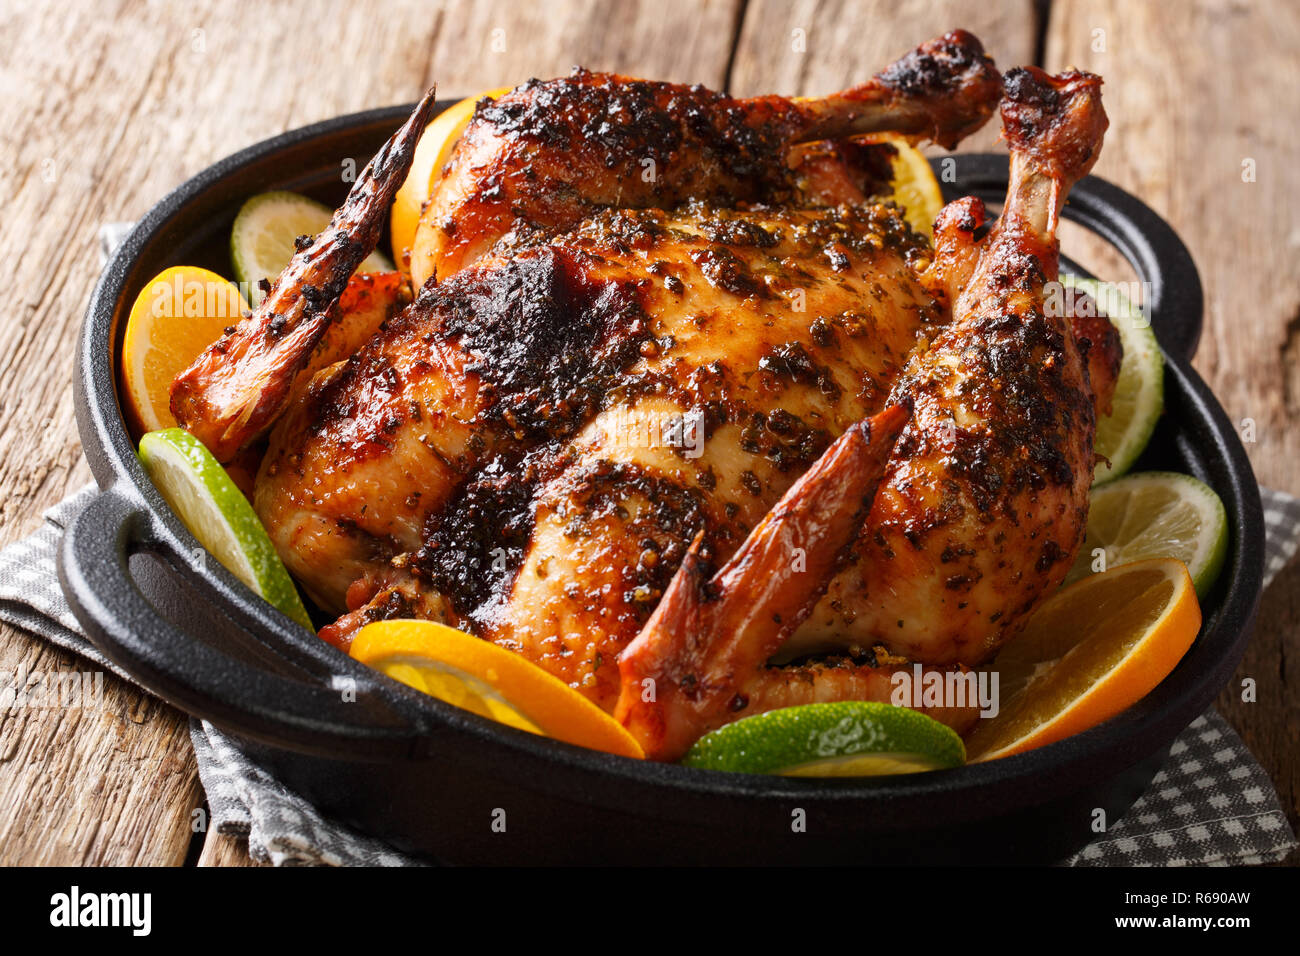 Spicy Cuban Mojo Chicken served with fresh oranges and limes close-up in a frying pan on the table. horizontal Stock Photo